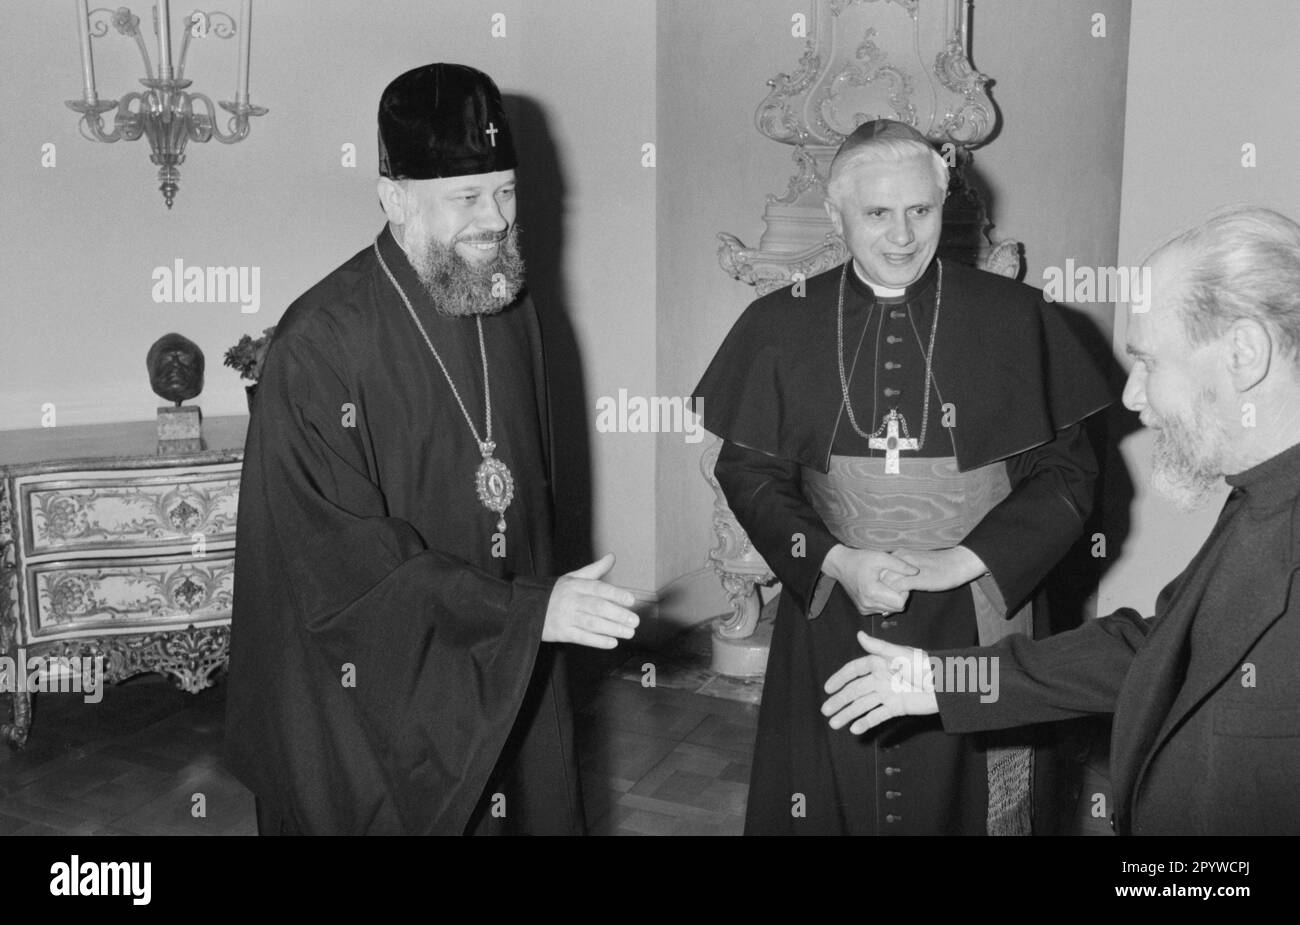 The Russian Orthodox Archbishop of Sagorsk Vladimir Dimitroskoy and Josef Cardinal Ratzinger (from left) during a conversation in Munich. [automated translation] Stock Photo